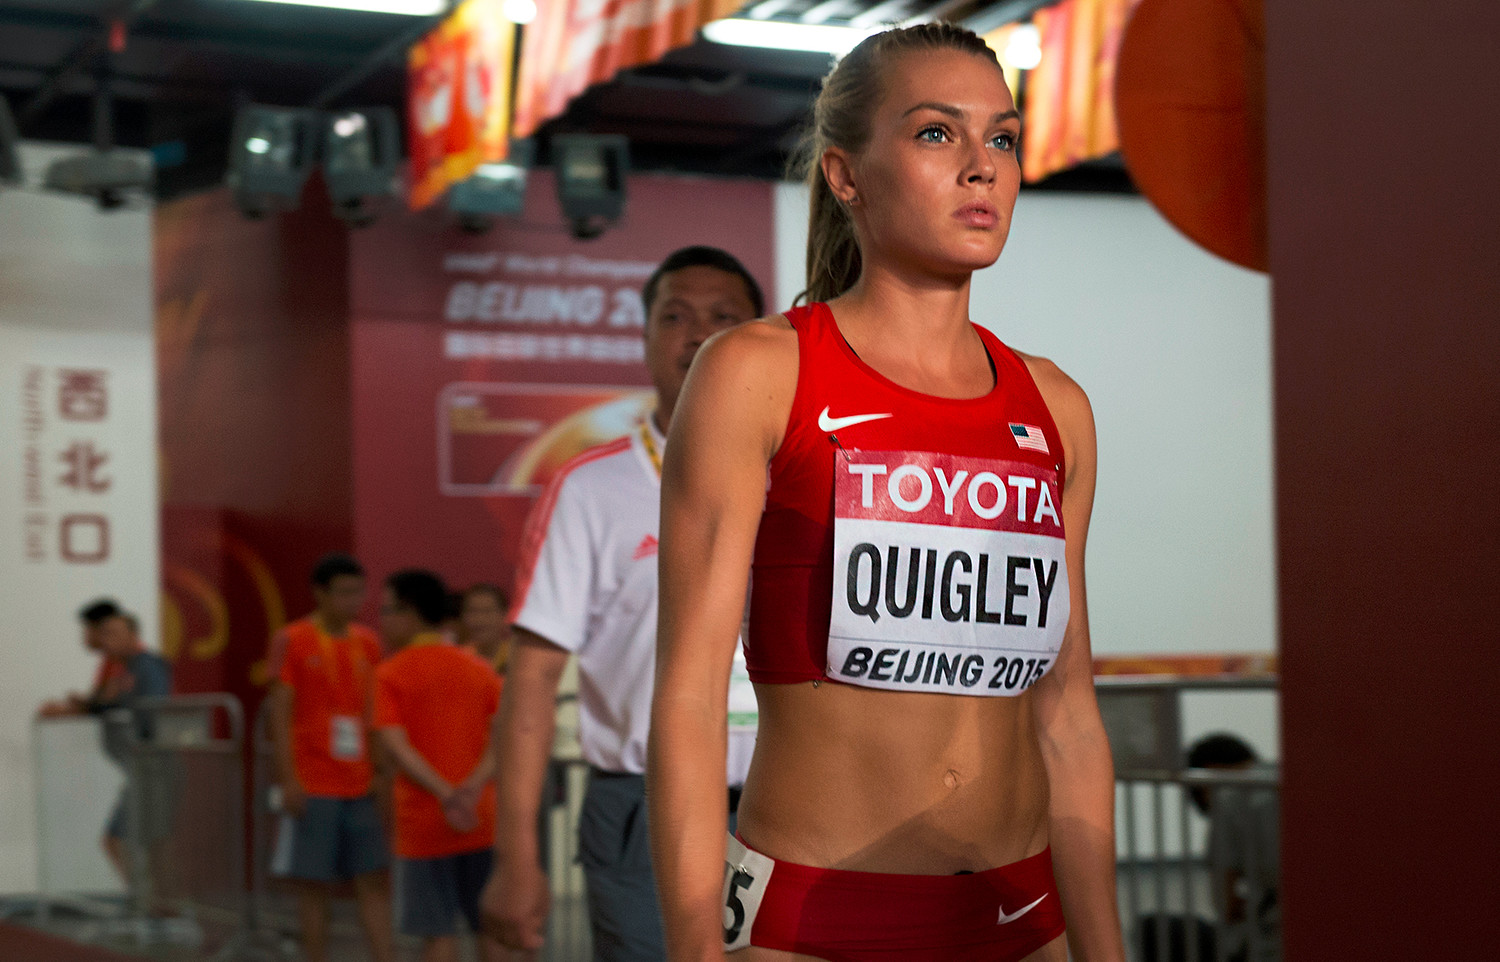 U.S. Olympian Colleen Quigley will defend her title at the NYRR Wanamaker Mile at the Millrose Games